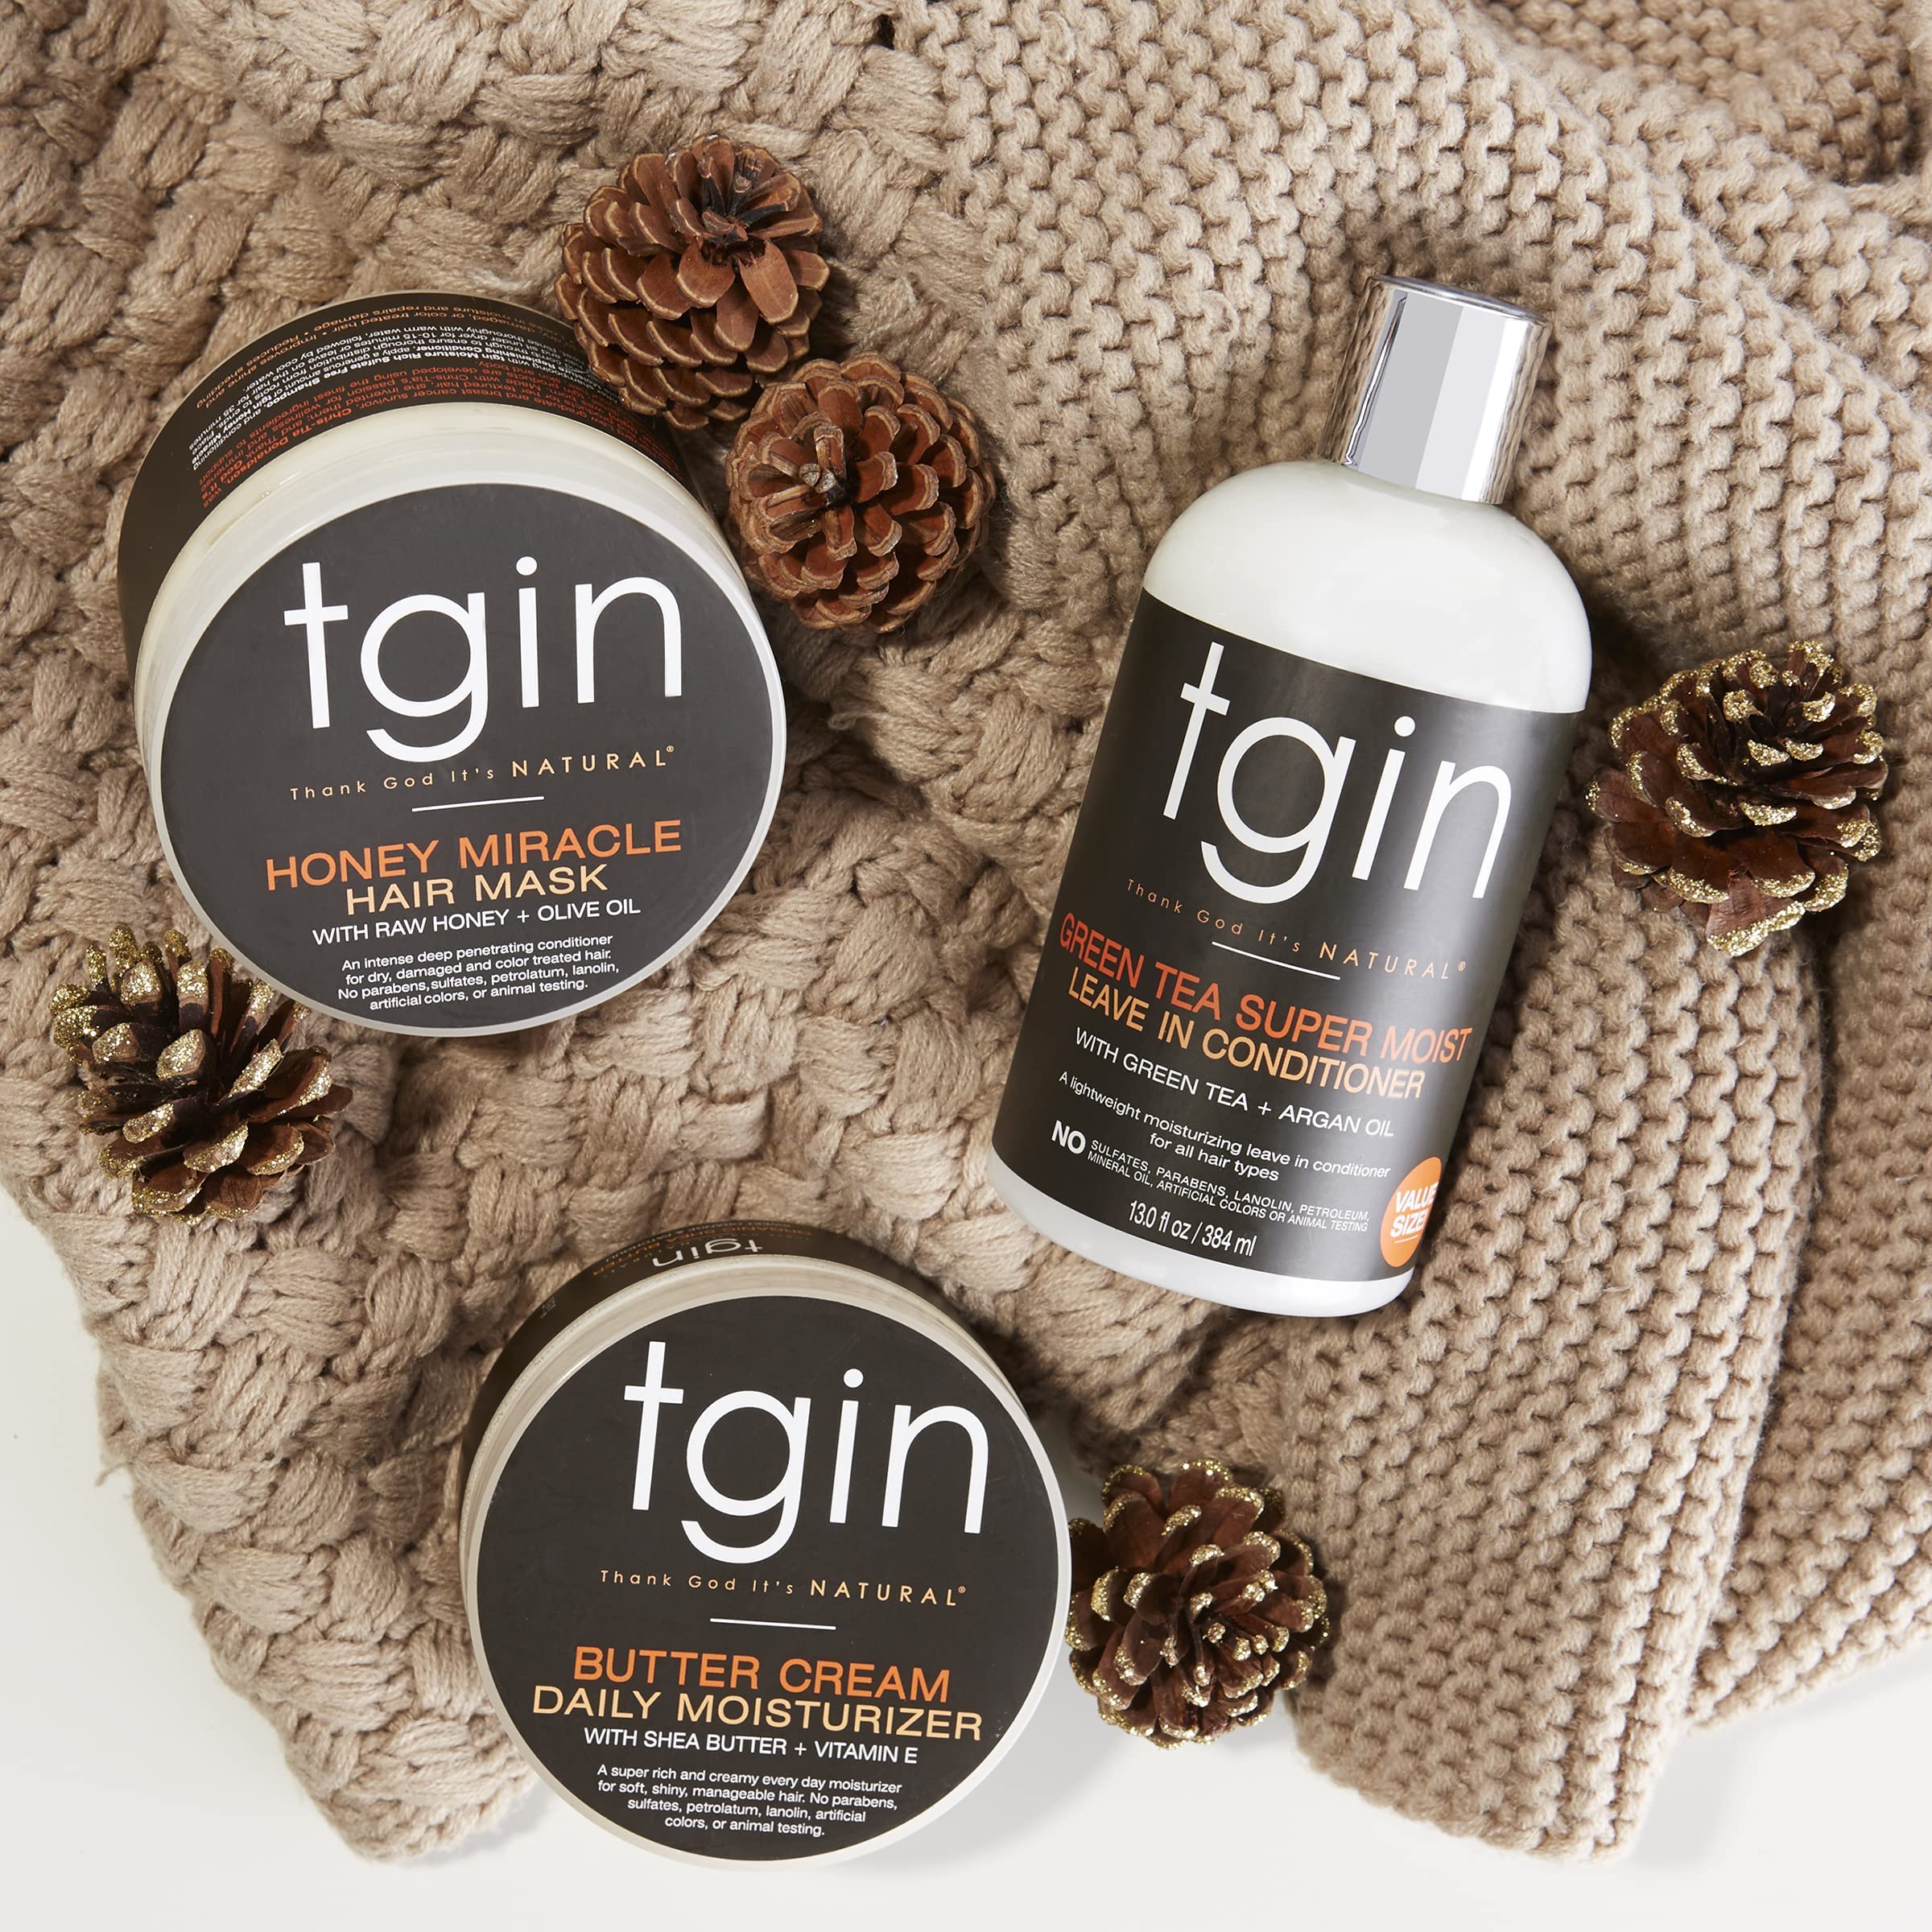 tgin Butter Cream Daily Moisturizer For Natural Hair - Dry Hair - Curly Hair - Hair Styling Product - Curl Cream - Paraben Free - Hair Cream - Type 3c and 4c hair - Styler - 12 Oz